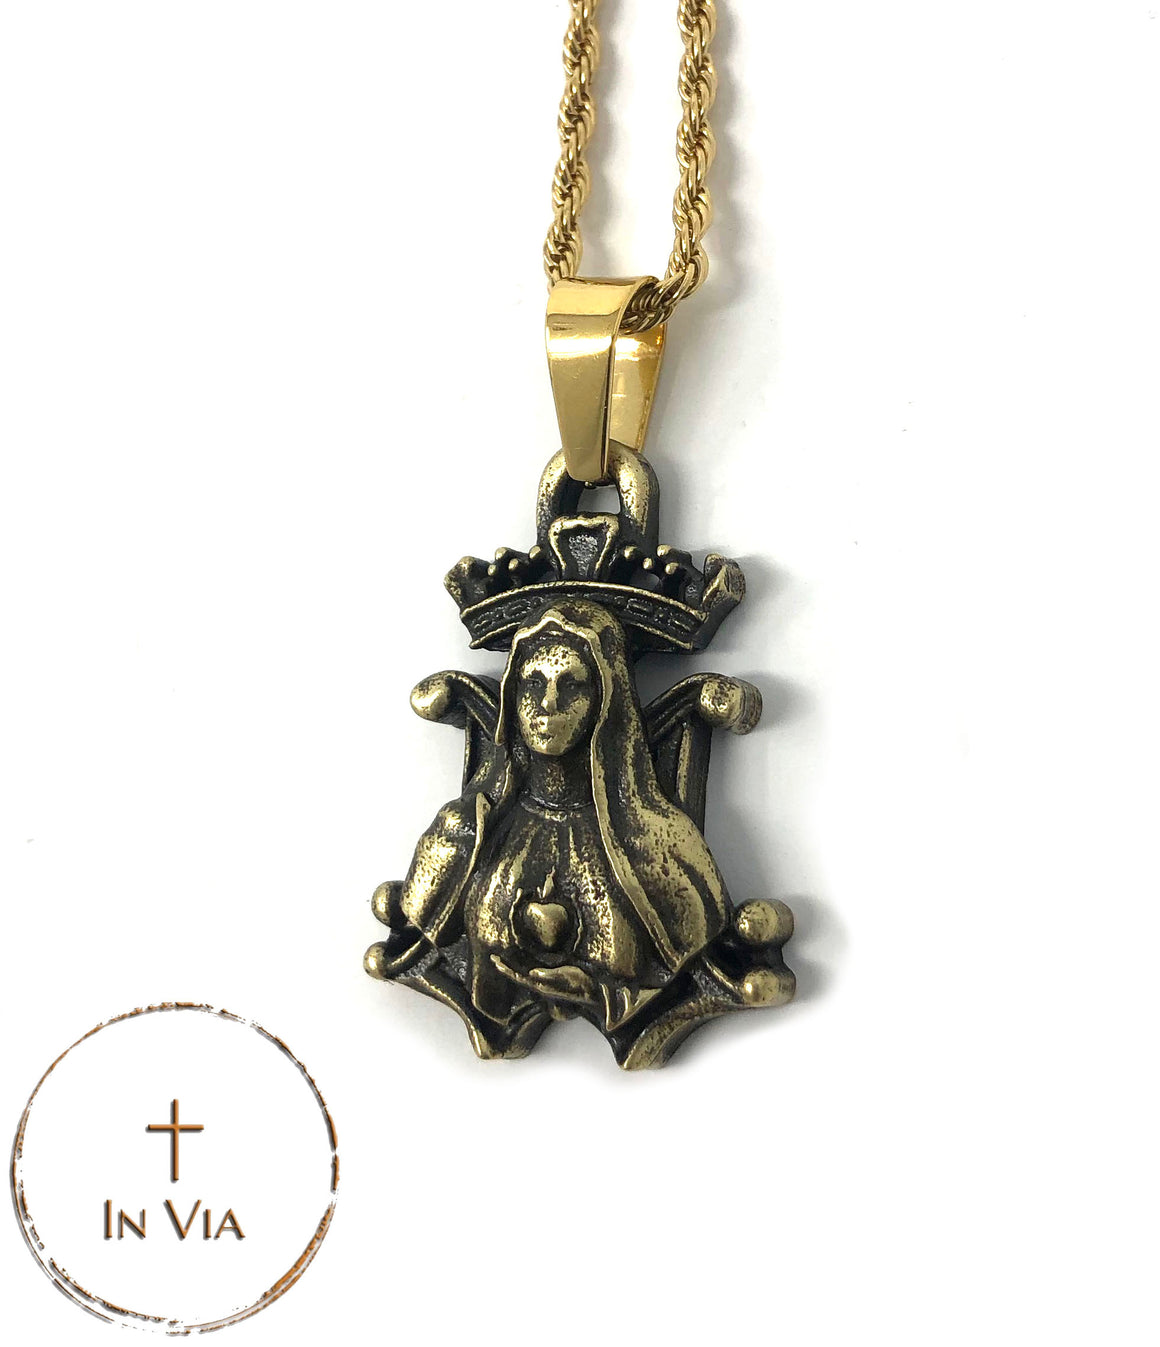 In Via's Our Blessed Mother Pendant- Solid Brass